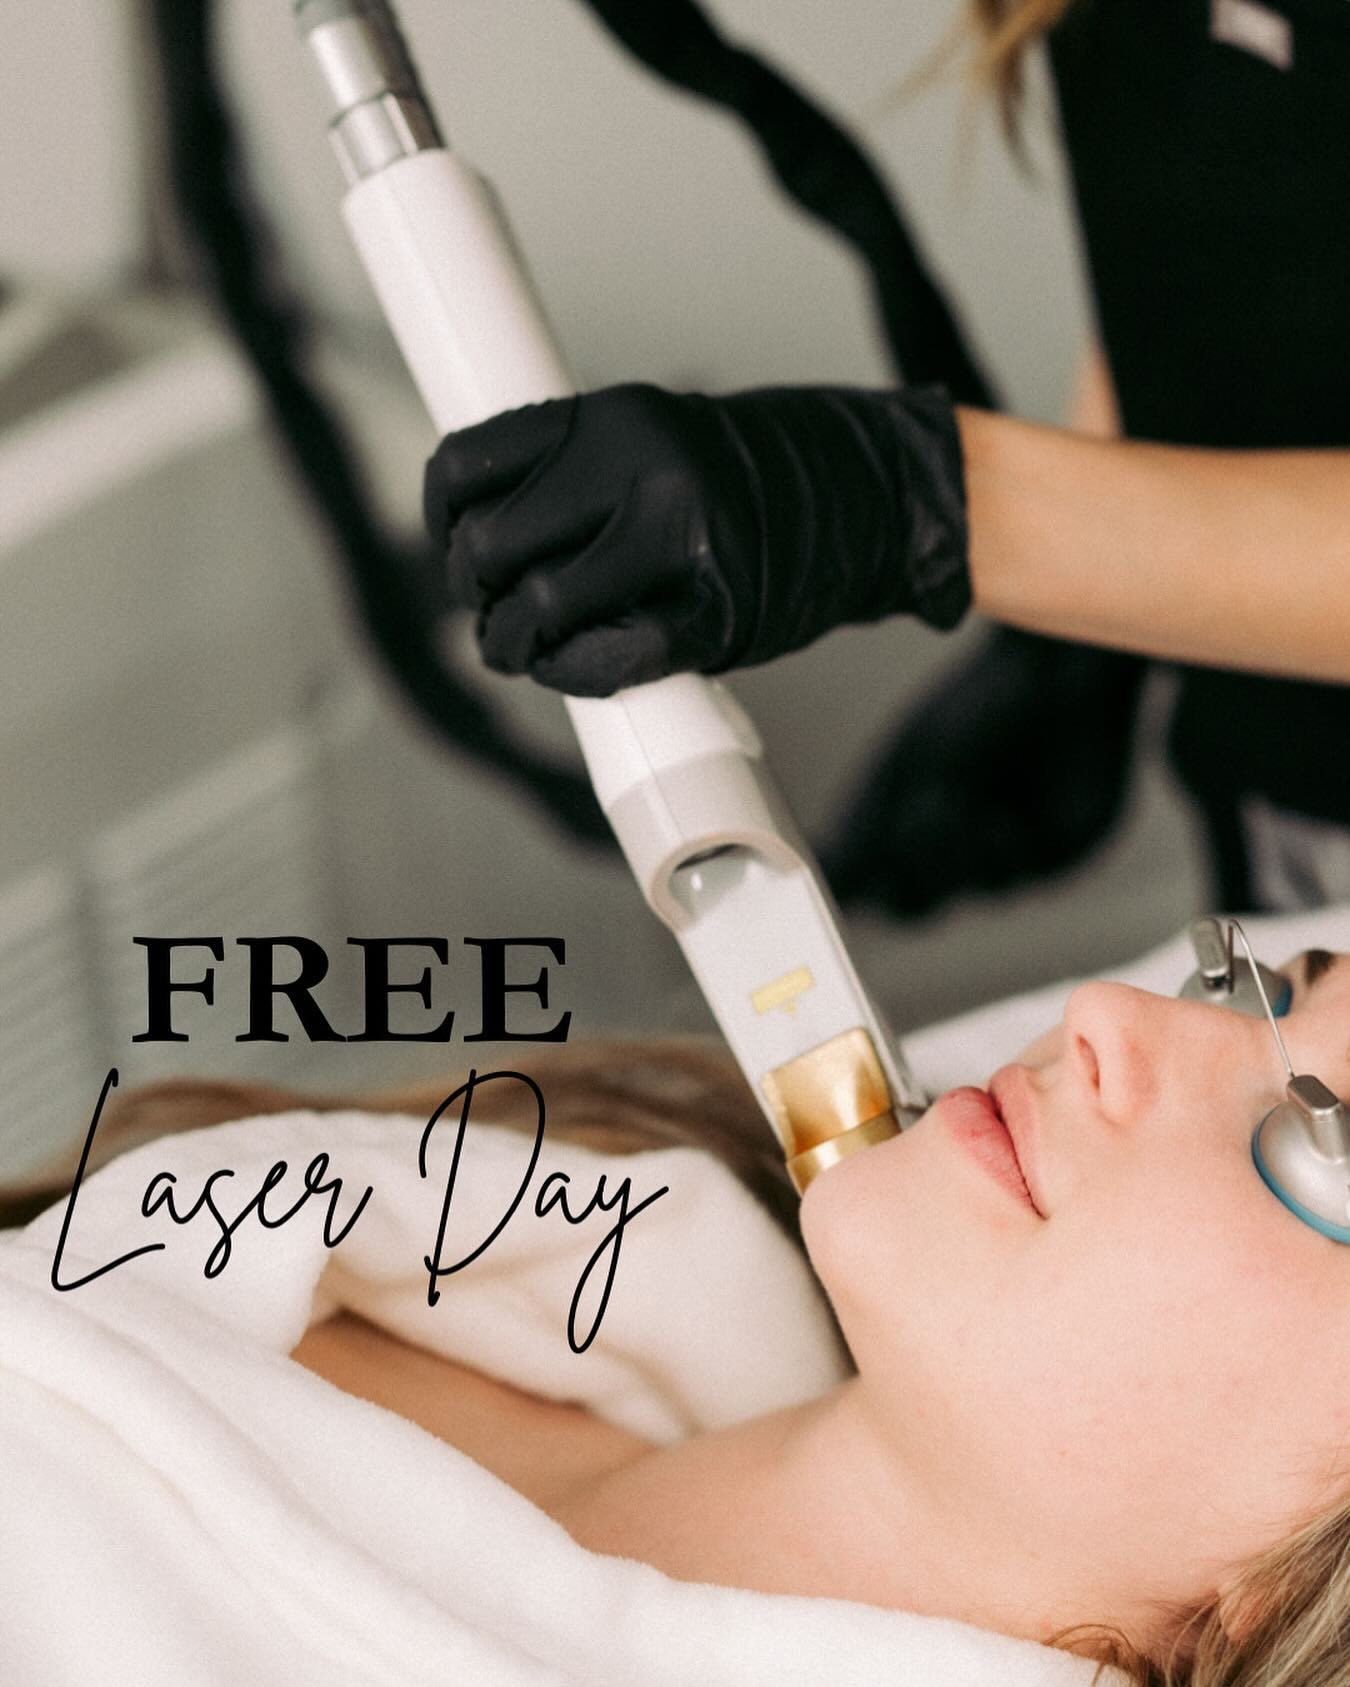 ⚡️ ONE DAY ONLY - FREE LASER - UPPER LIP, CHIN, UNDERARMS, OR BIKINI⚡️ May 22nd! 
⠀⠀⠀⠀⠀⠀⠀⠀⠀
If you&rsquo;ve been thinking of ditching the razor, now is the time to start laser!
⠀⠀⠀⠀⠀⠀⠀⠀⠀
NEW clients (or existing clients who have not previously had th